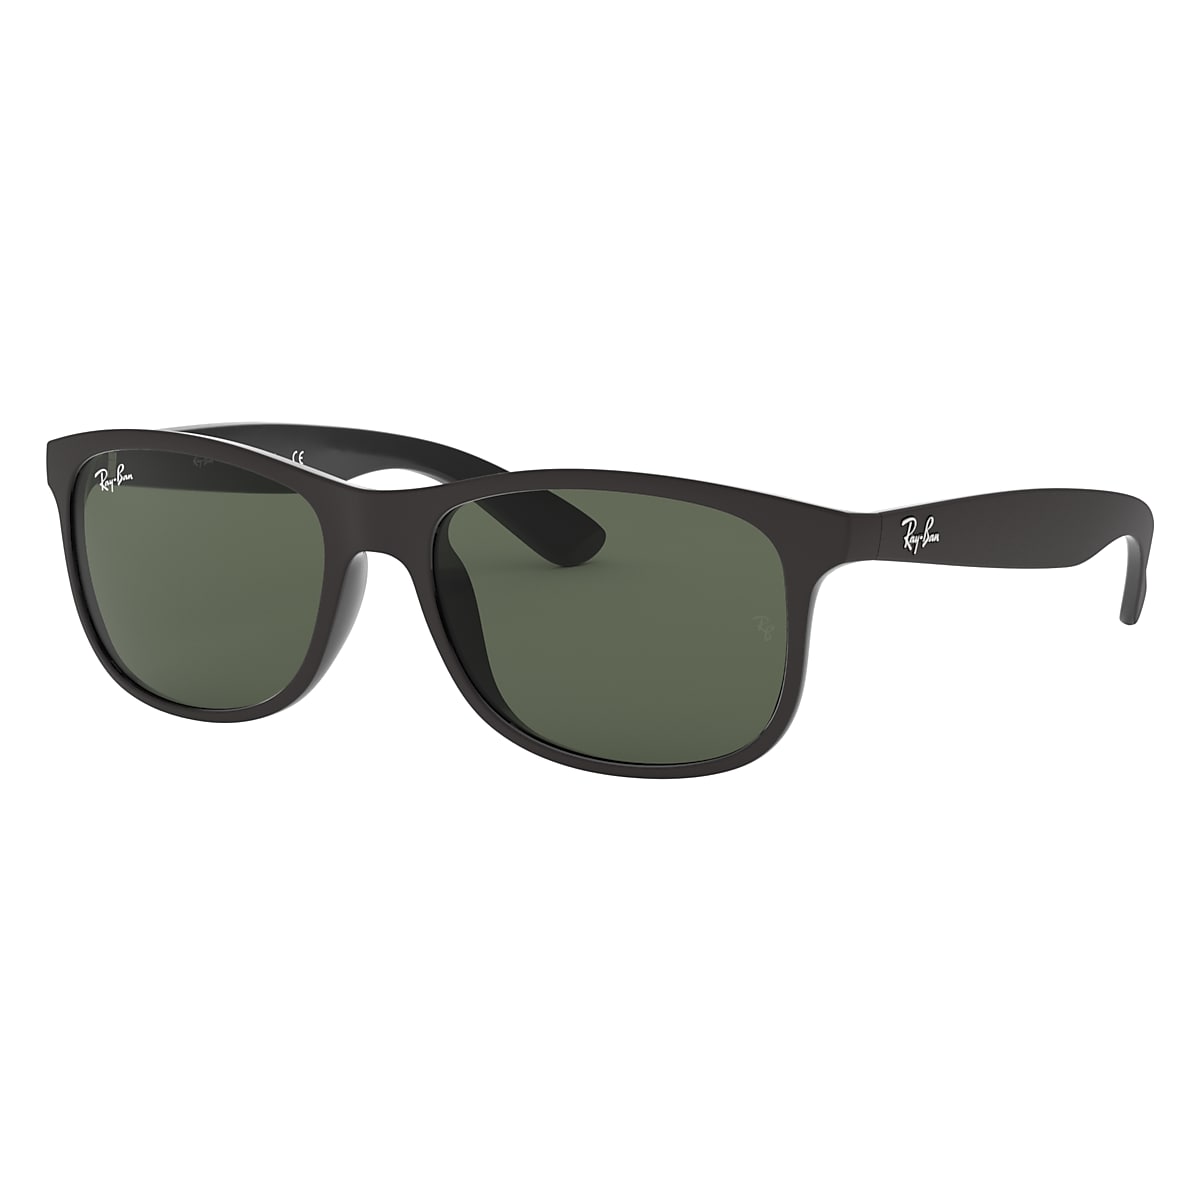 biografi frimærke tykkelse Andy Sunglasses in Black and Green | Ray-Ban®